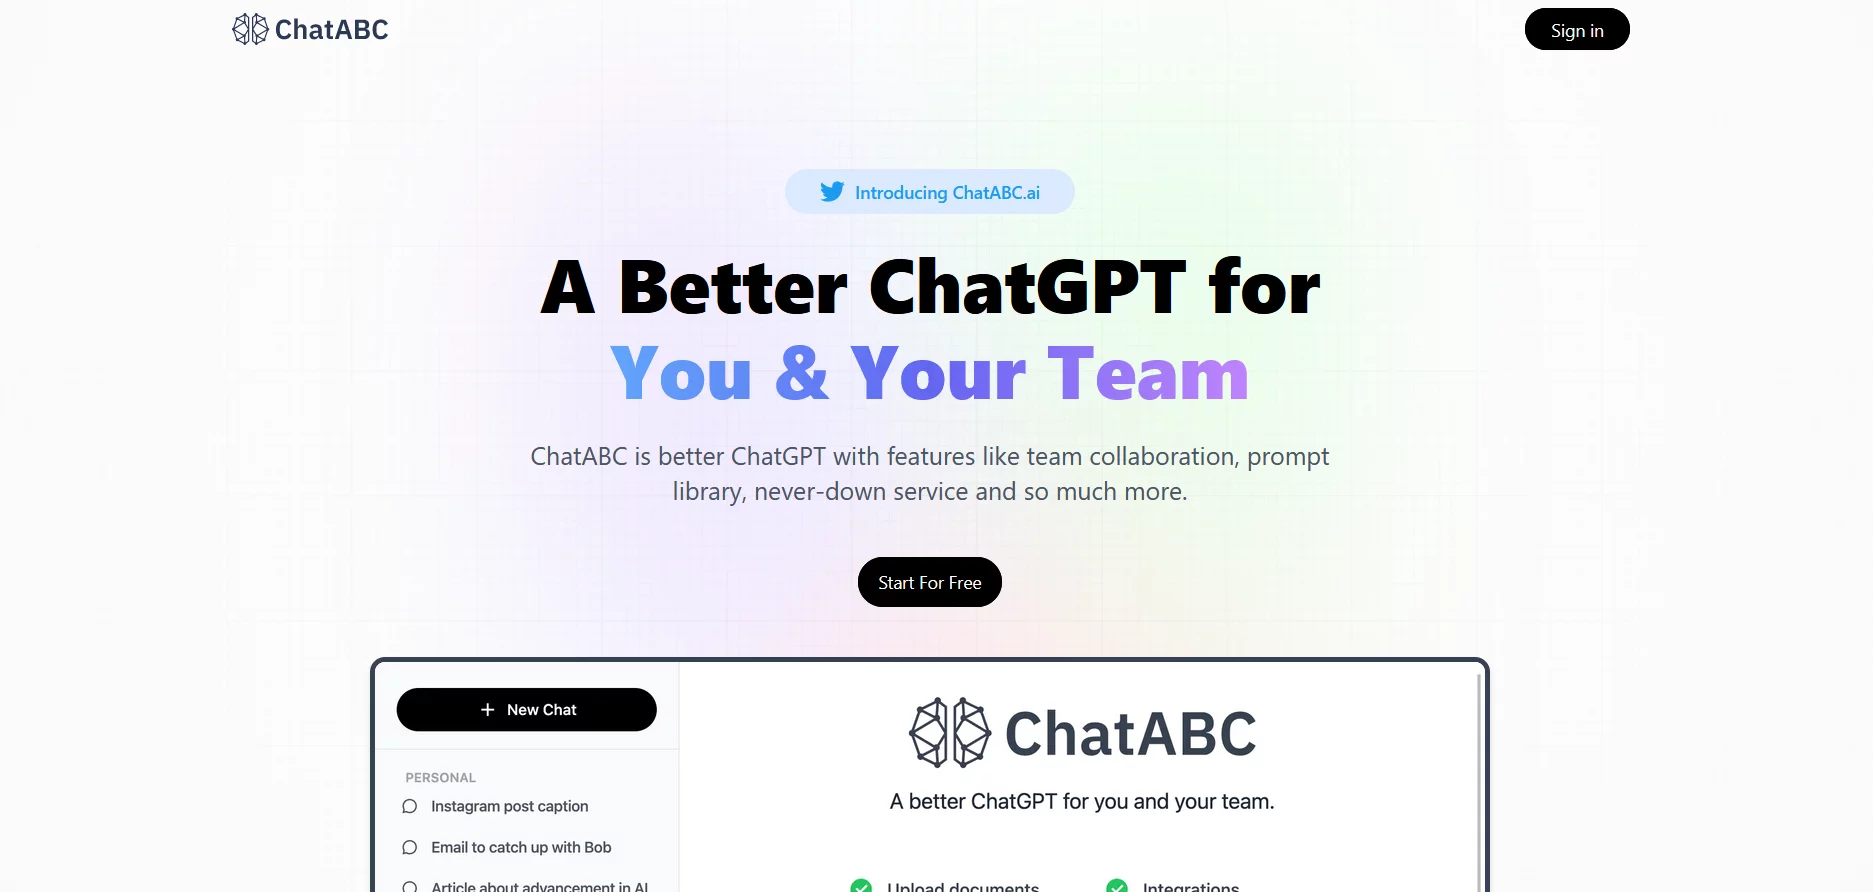  A Better ChatGPT for You & Your Team